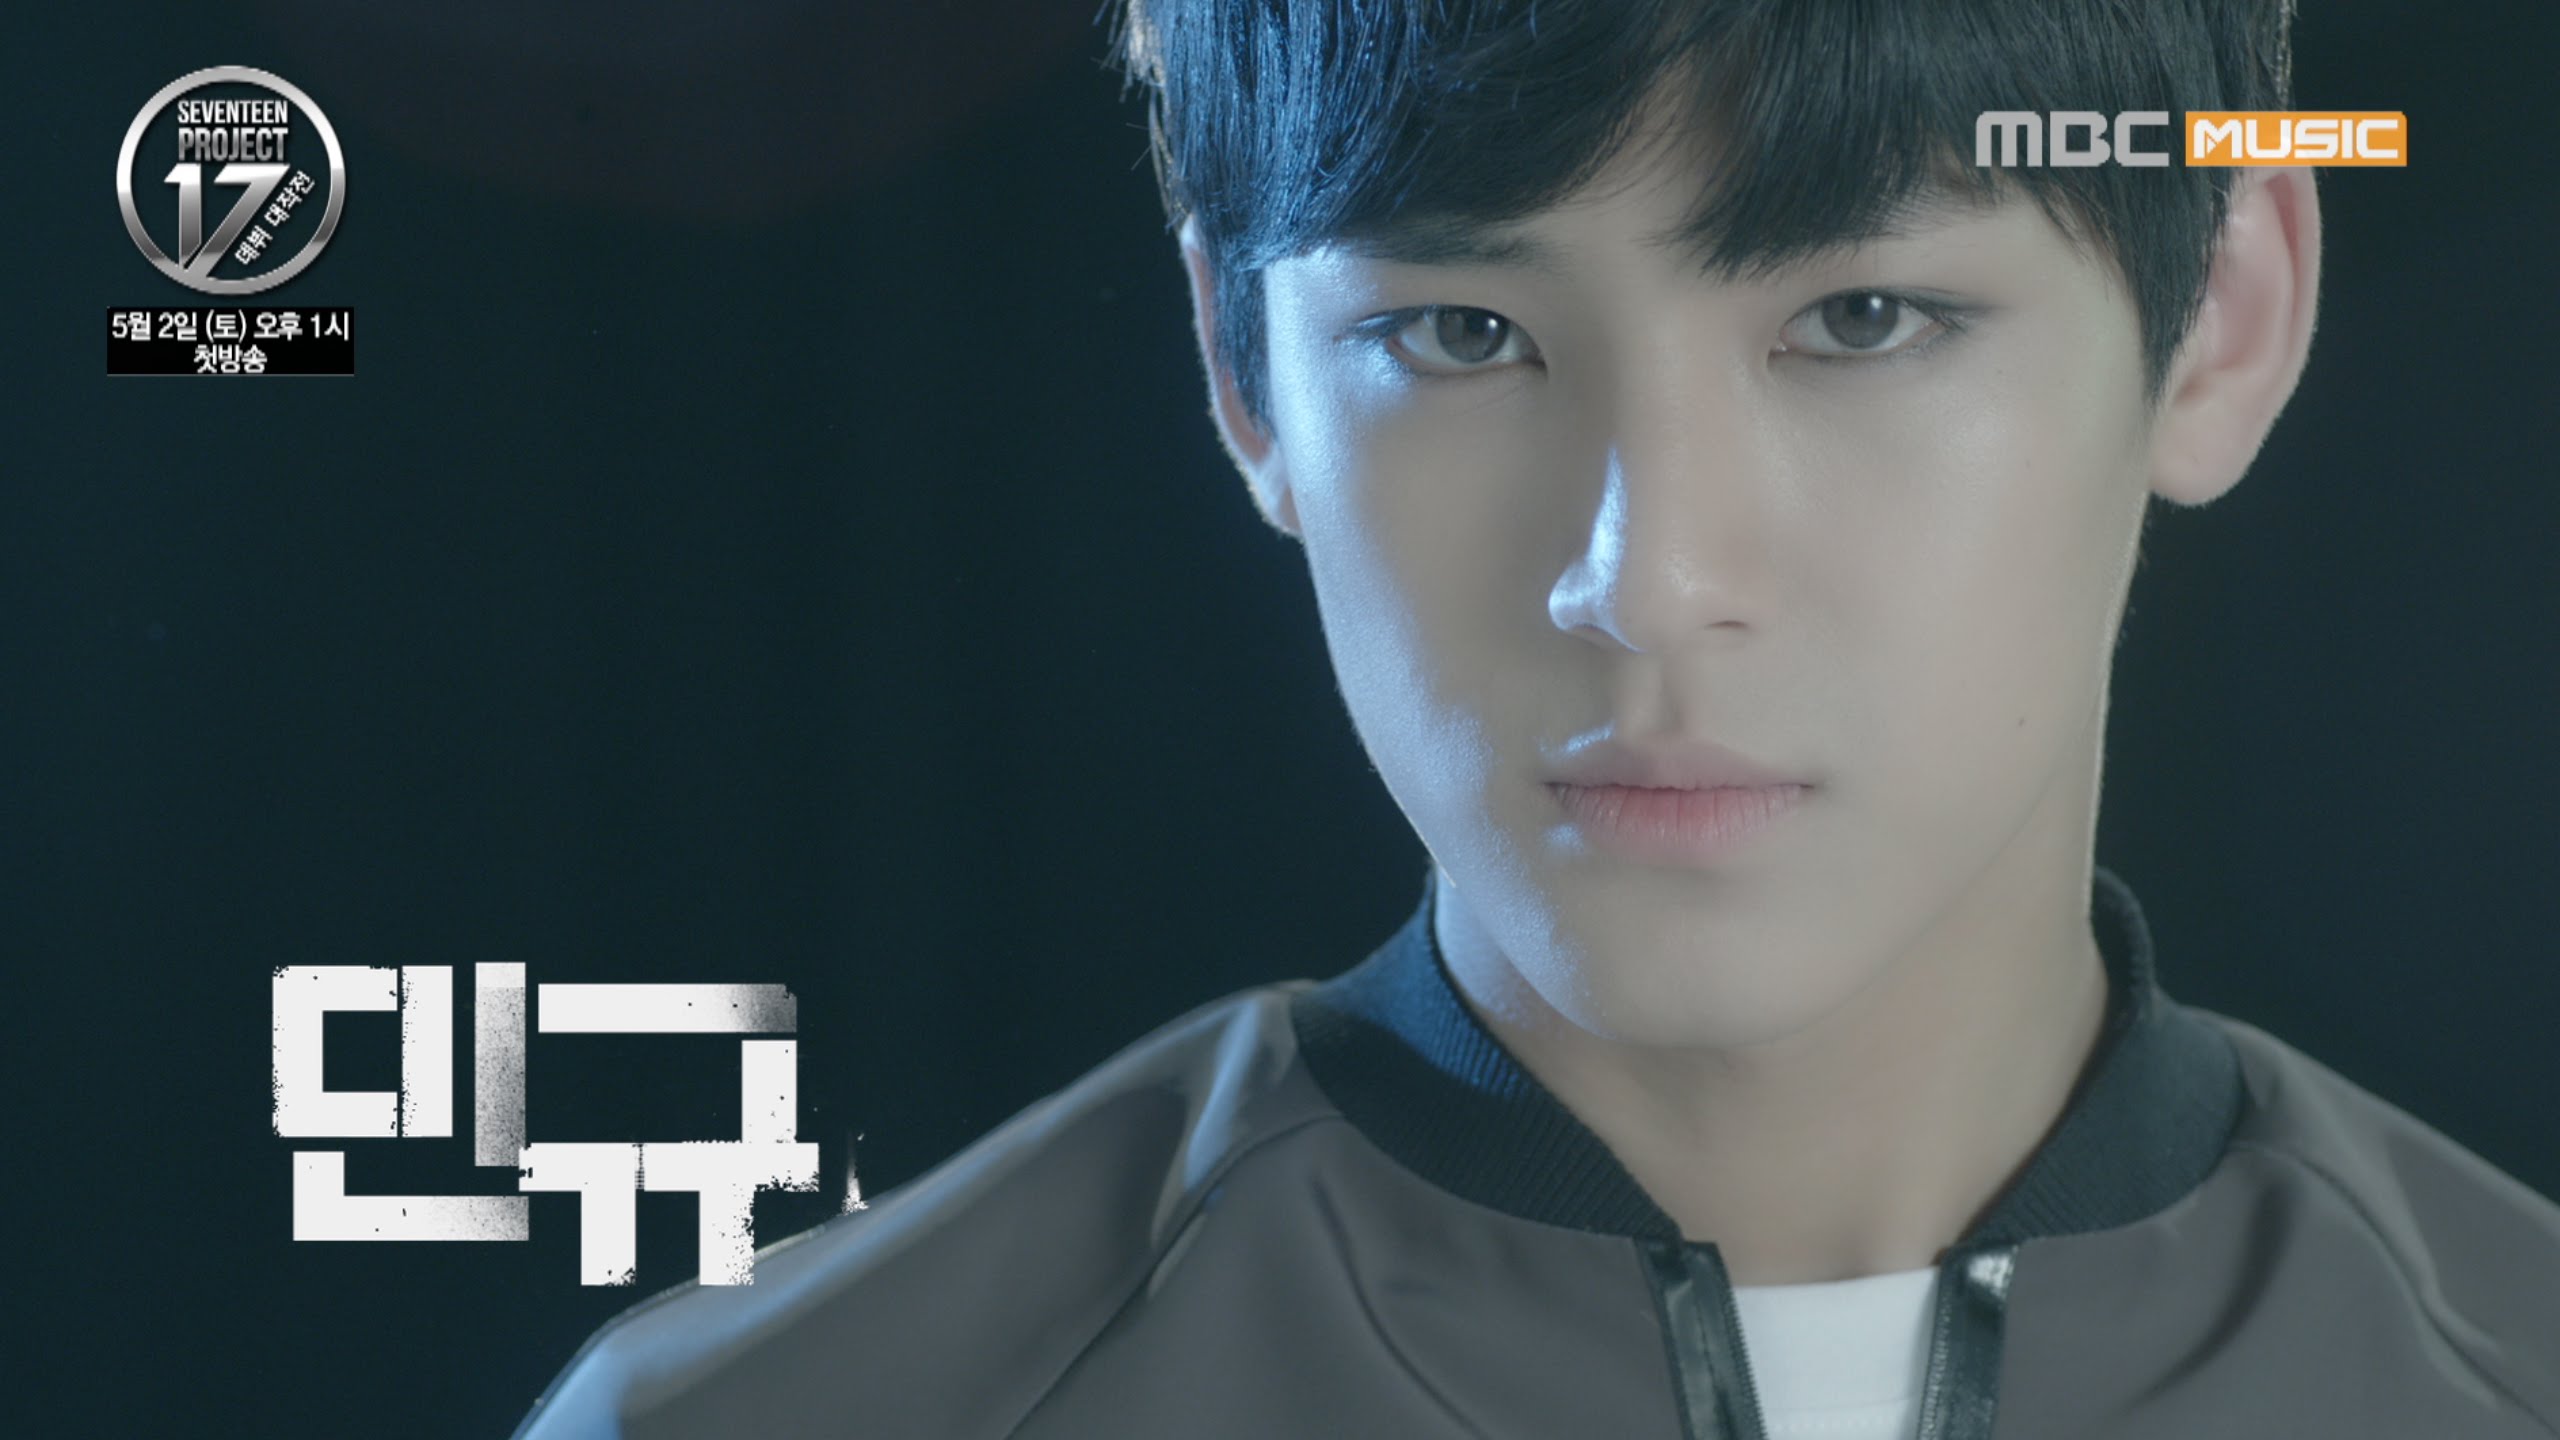  and Woozi from Pledis Entertainments upcoming boy group SEVENTEEN 2560x1440